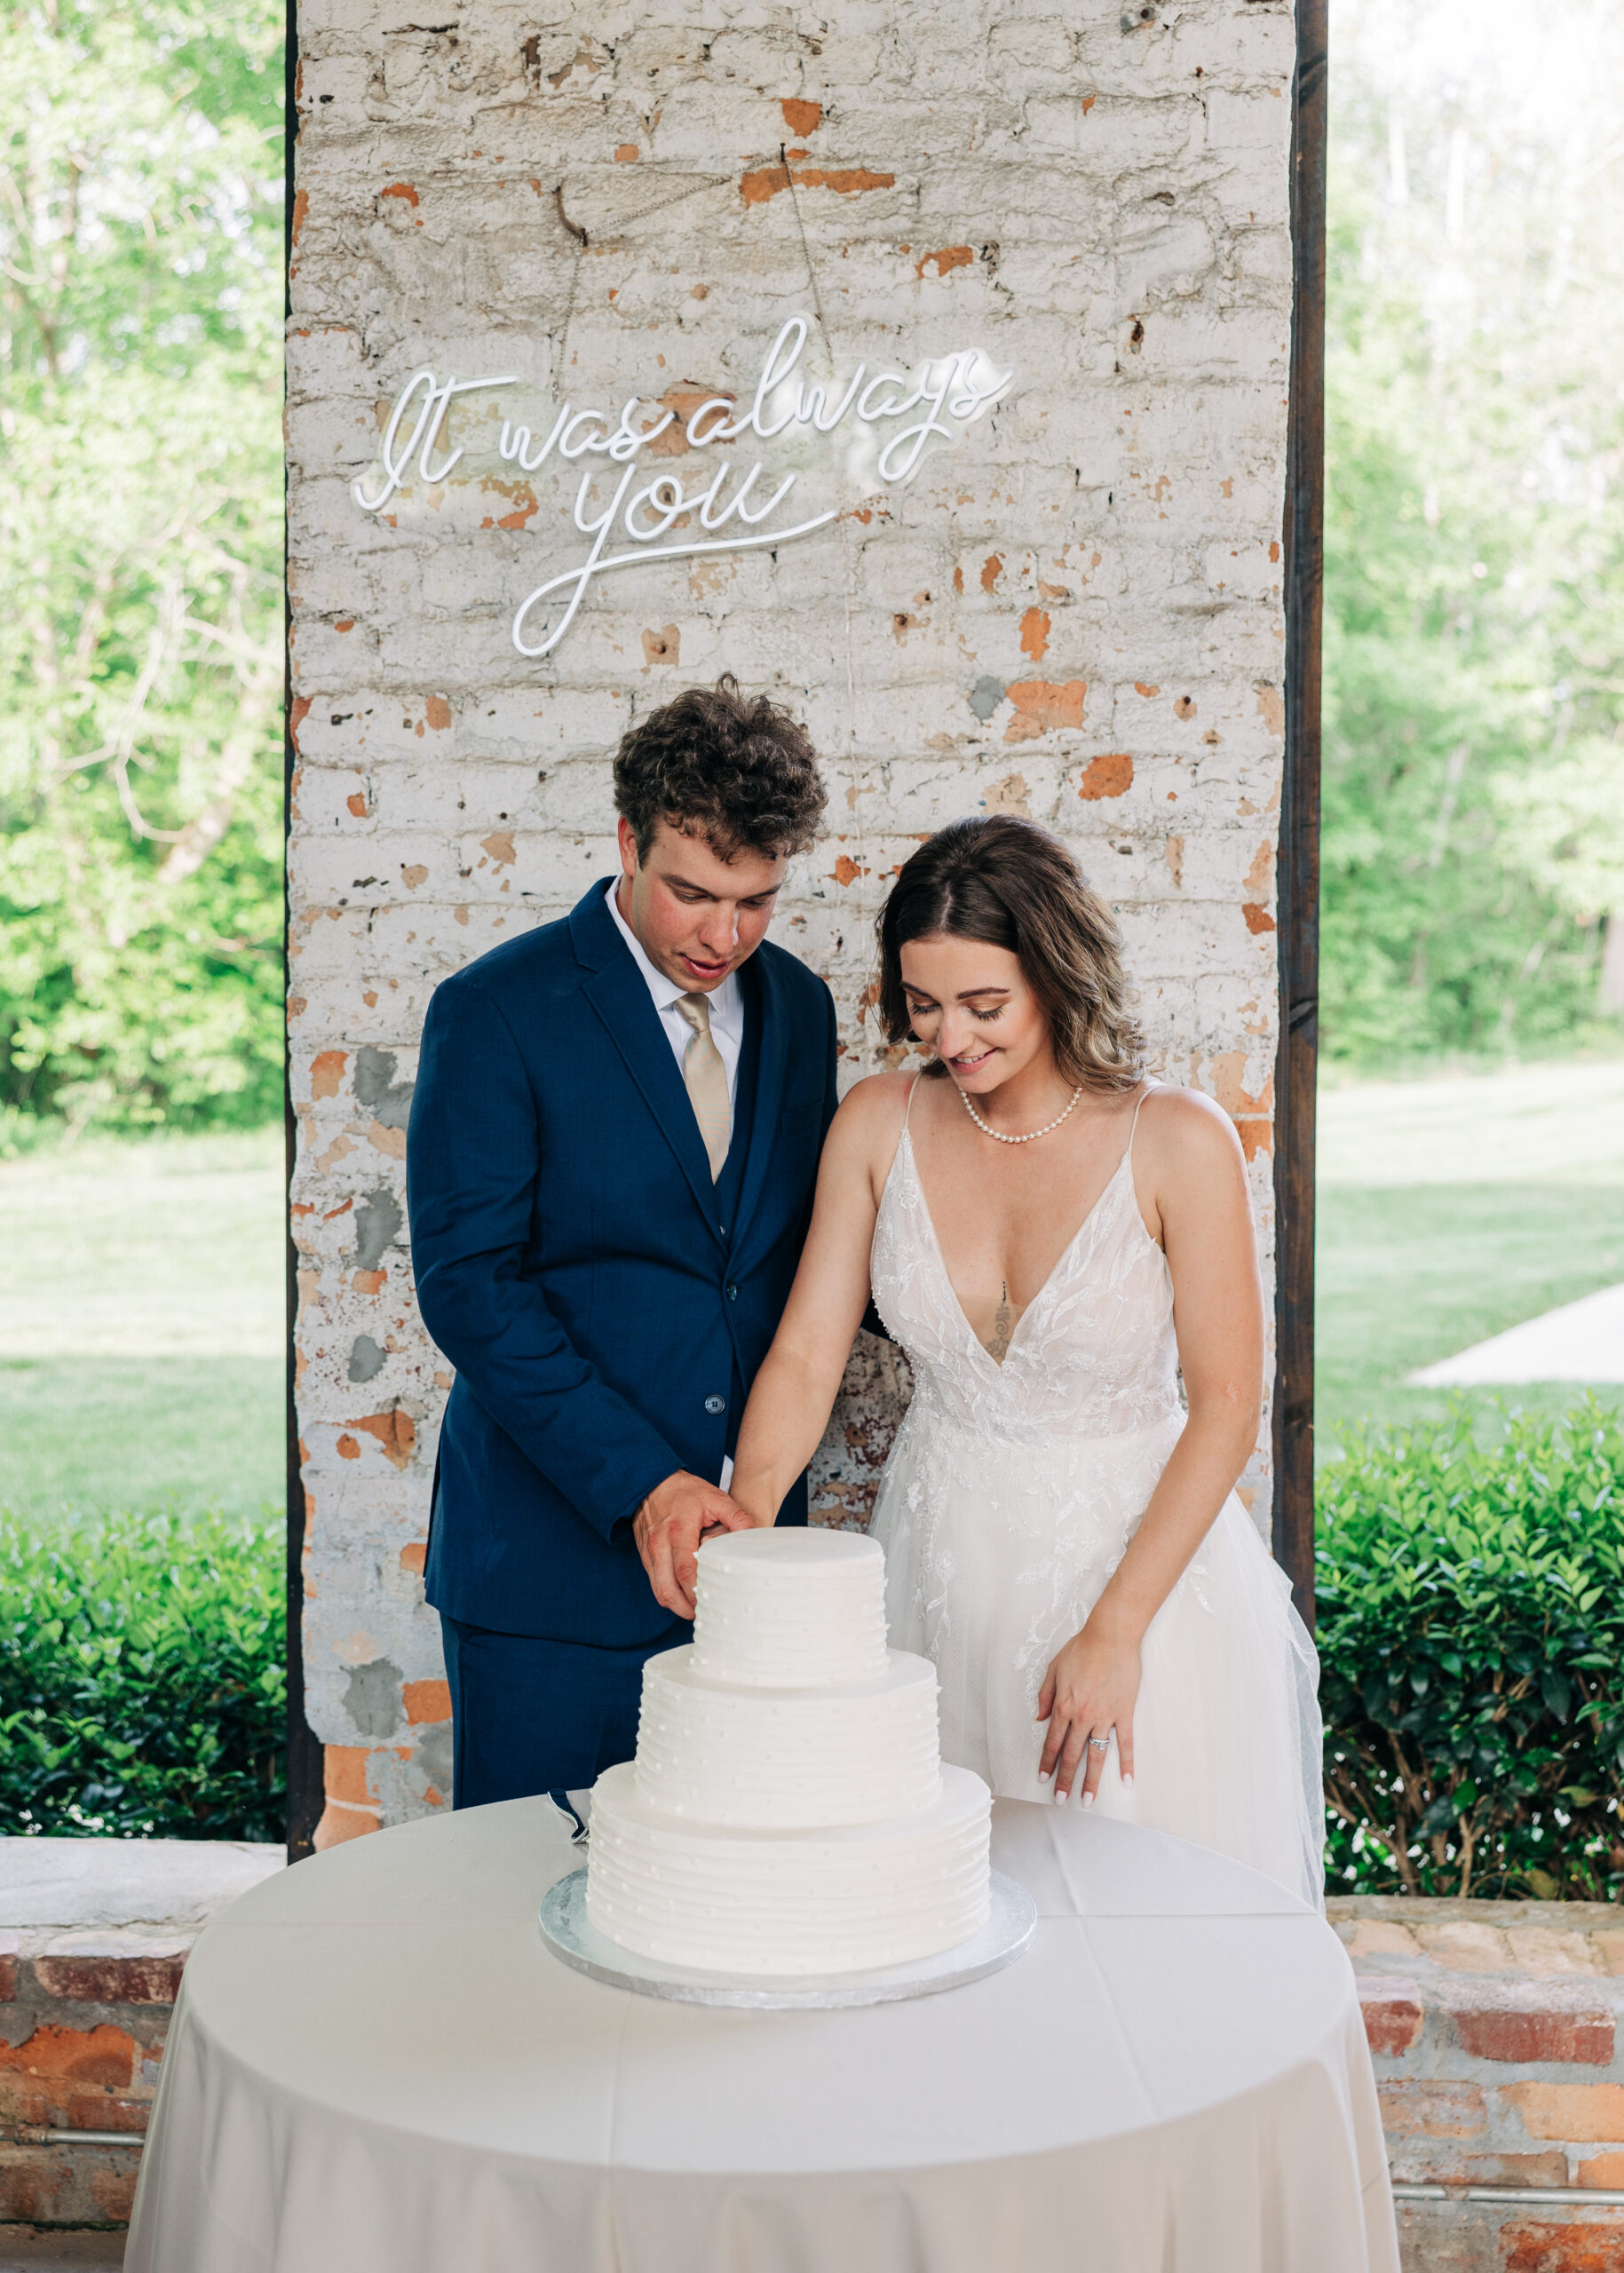 Newlyweds cut their white three tier cake in a lace dress and blue suit